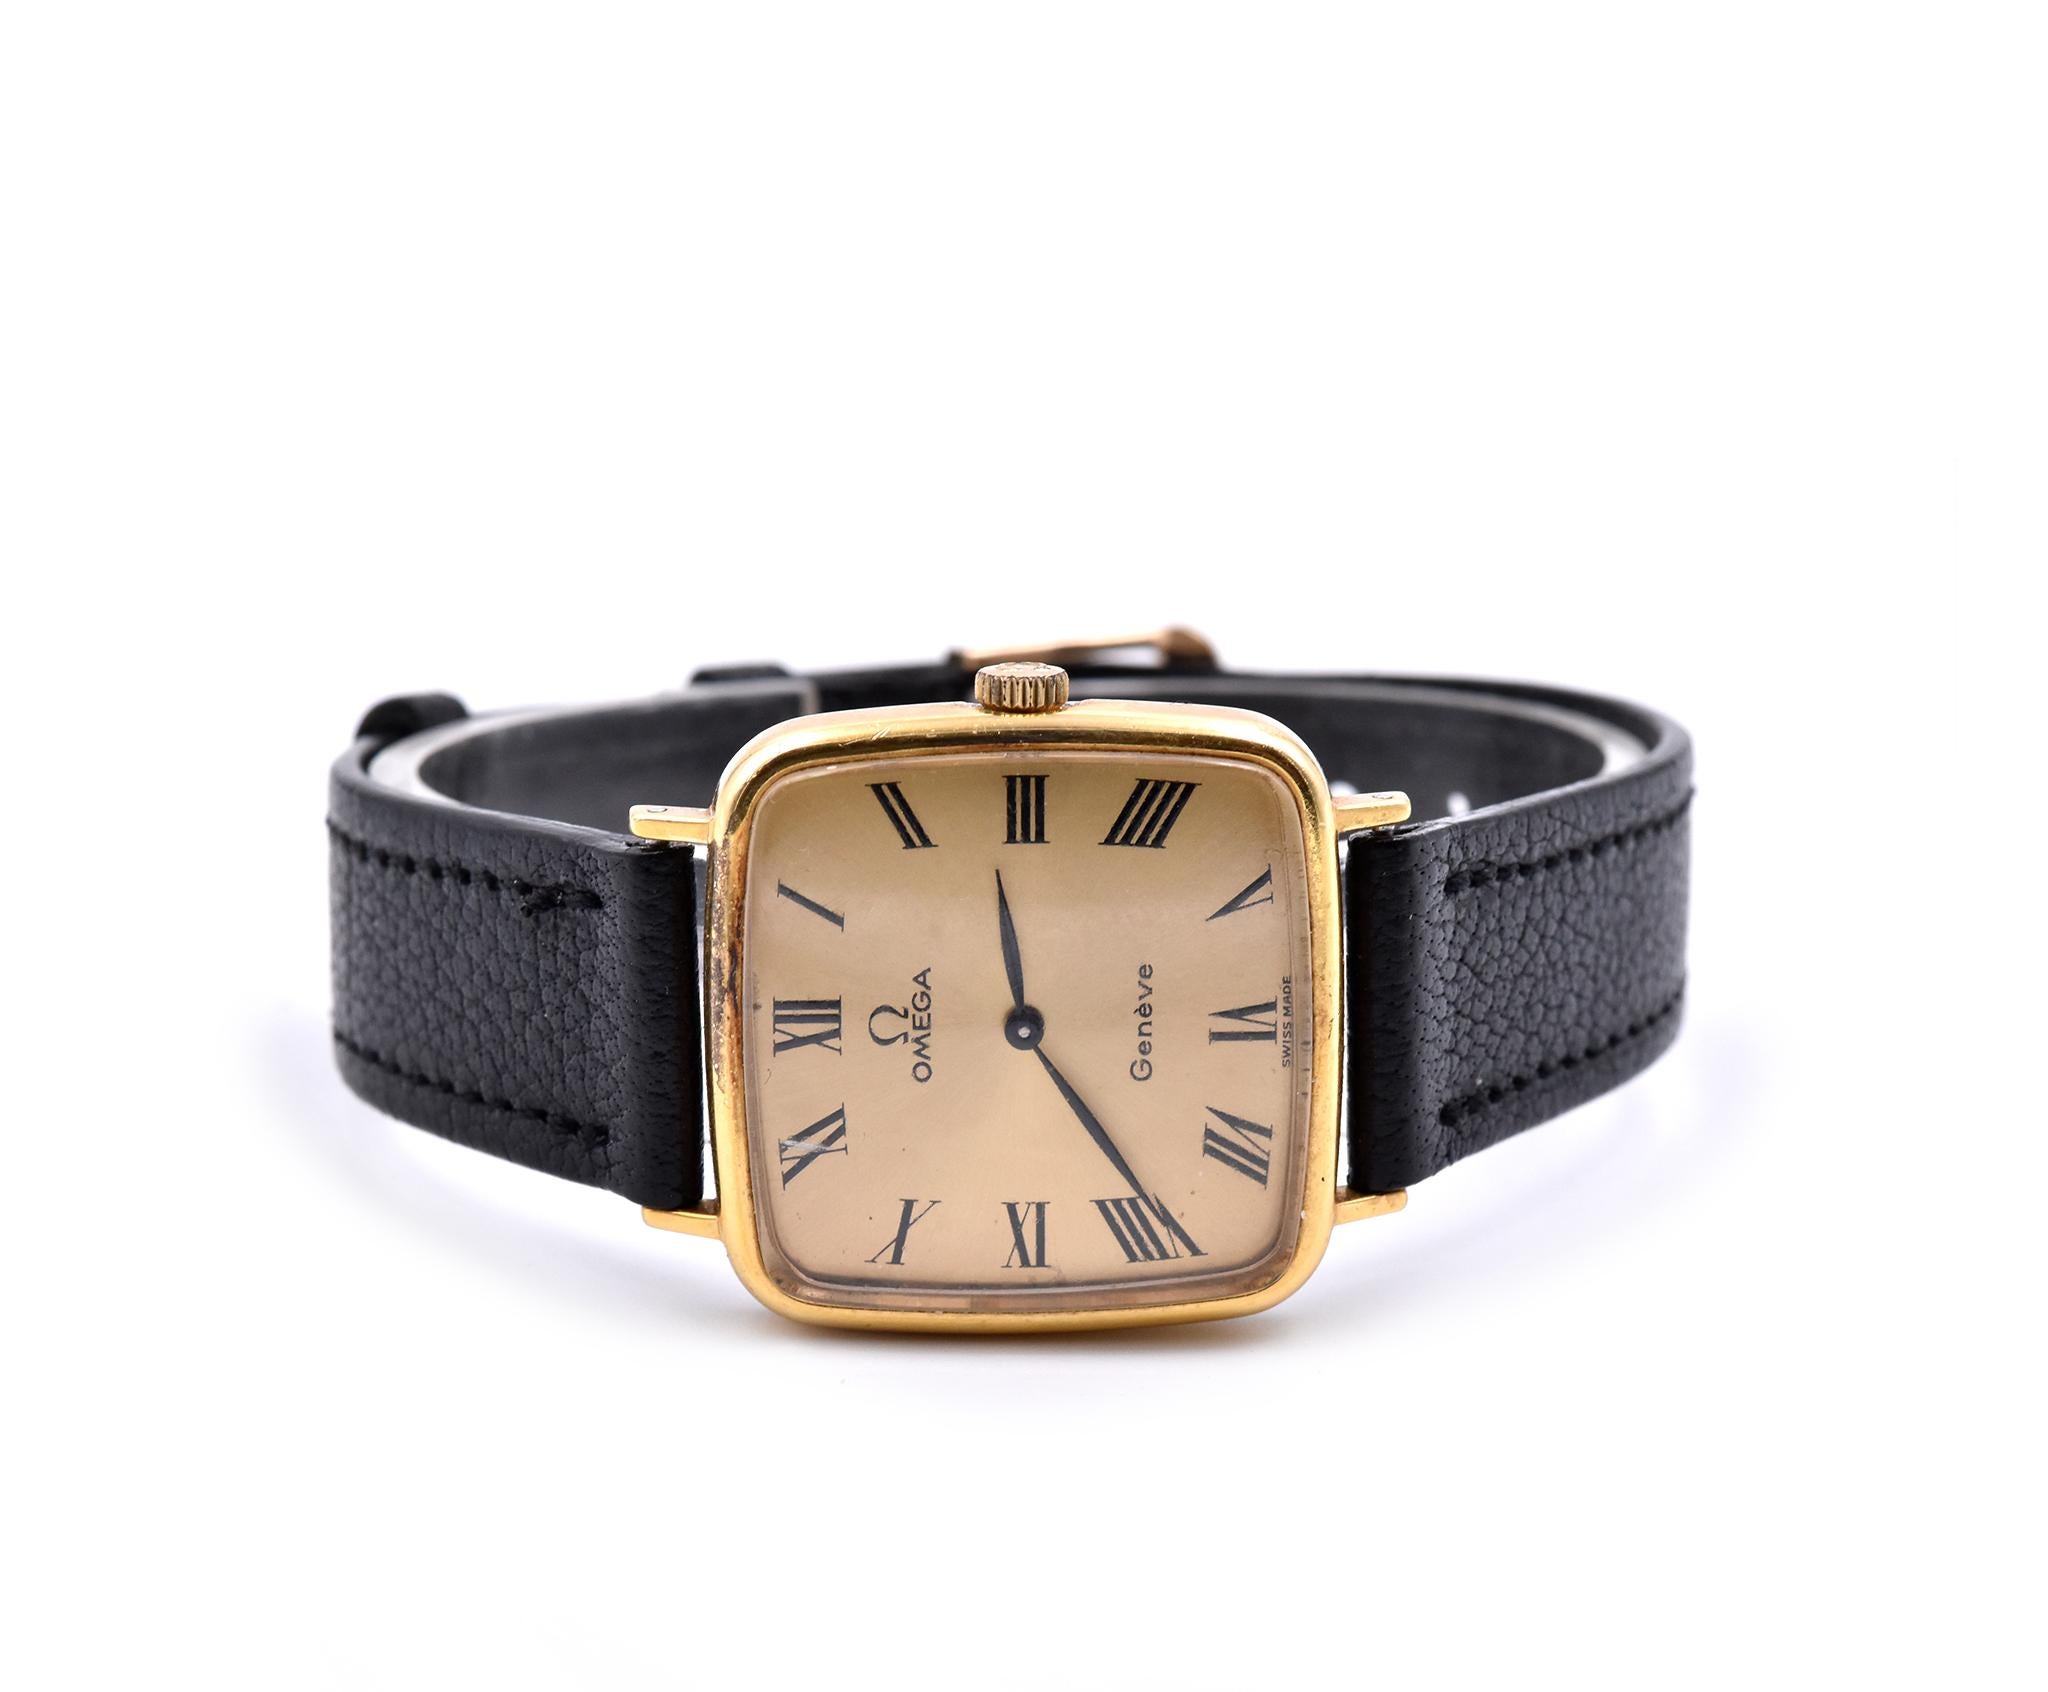 Movement: automatic
Function: hours, minutes
Case: 27.30mm 18k yellow gold-plated case, plastic crystal
Band: black alligator leather band, gold tang buckle
Dial: champagne dial, black steel hands, black Roman hour markers
Reference #: 17